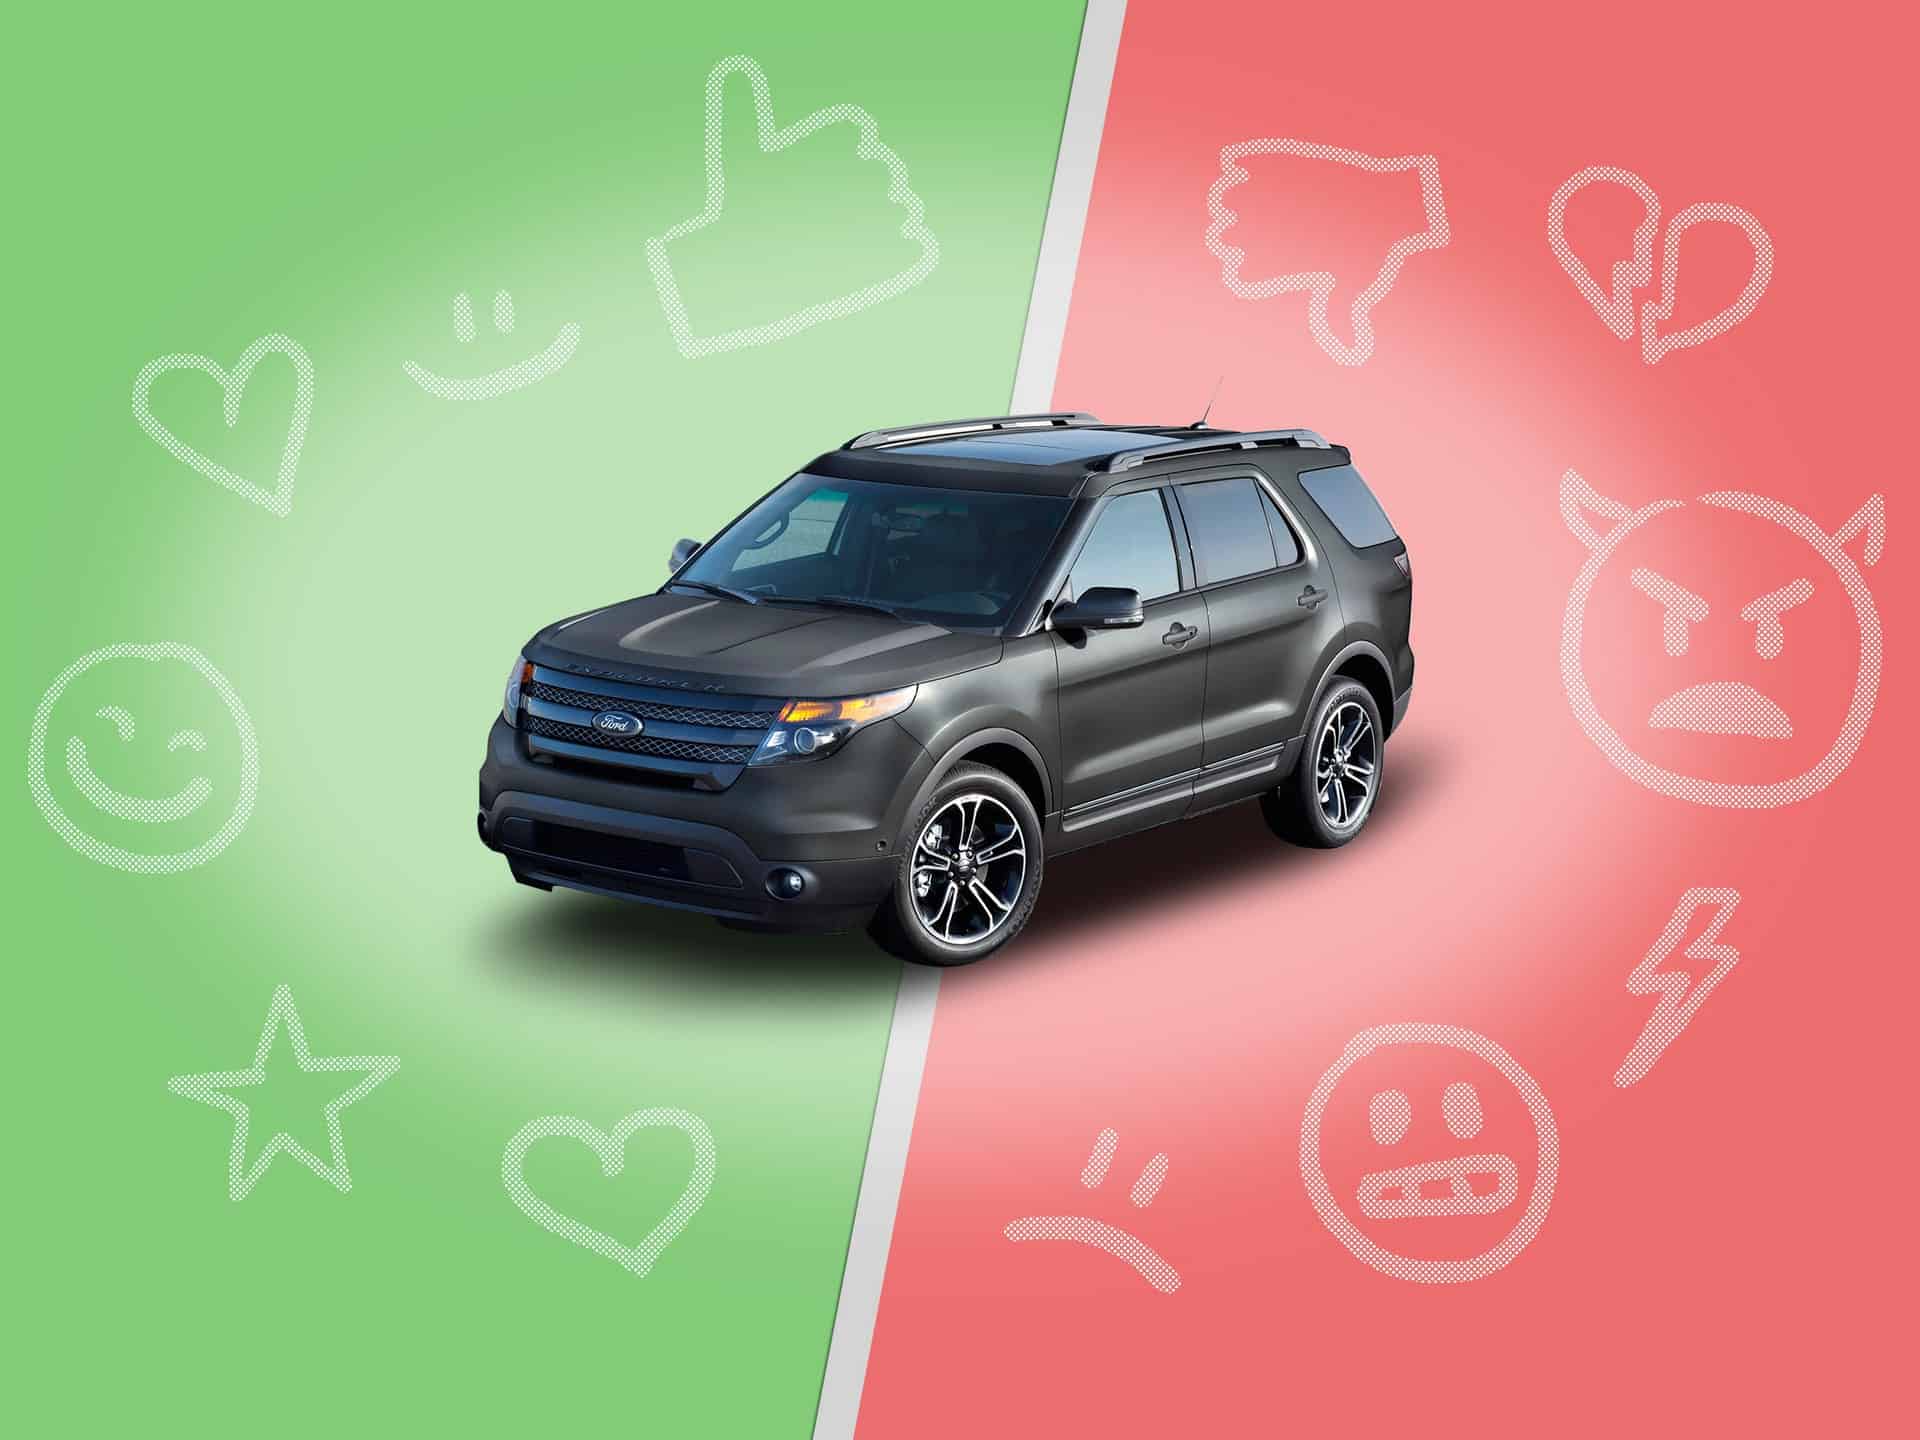 The 2020 Ford Explorer